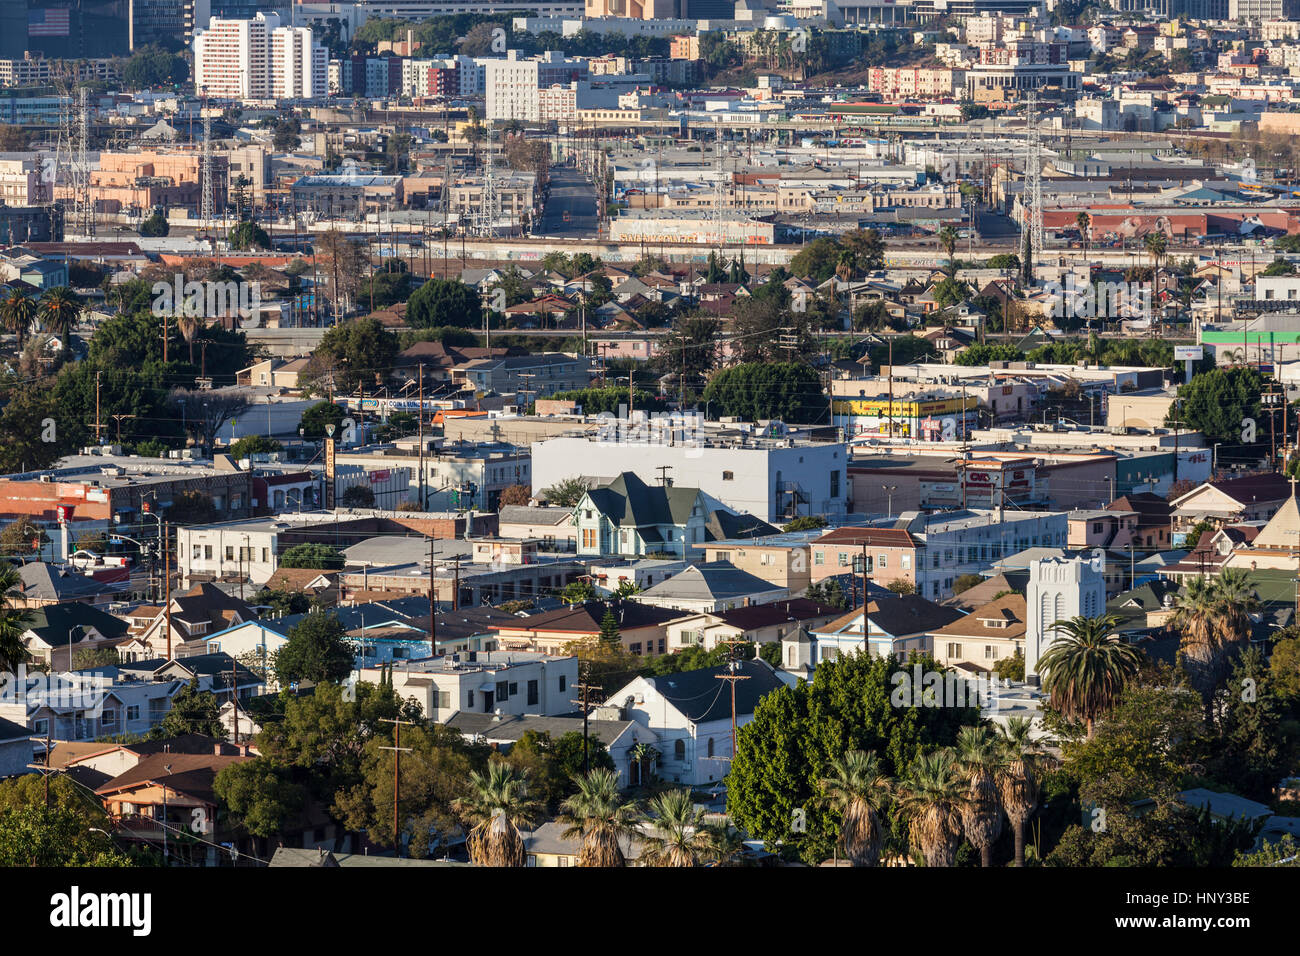 Editorial view of urban Lincoln Heights in the City of Los Angeles, California. Stock Photo